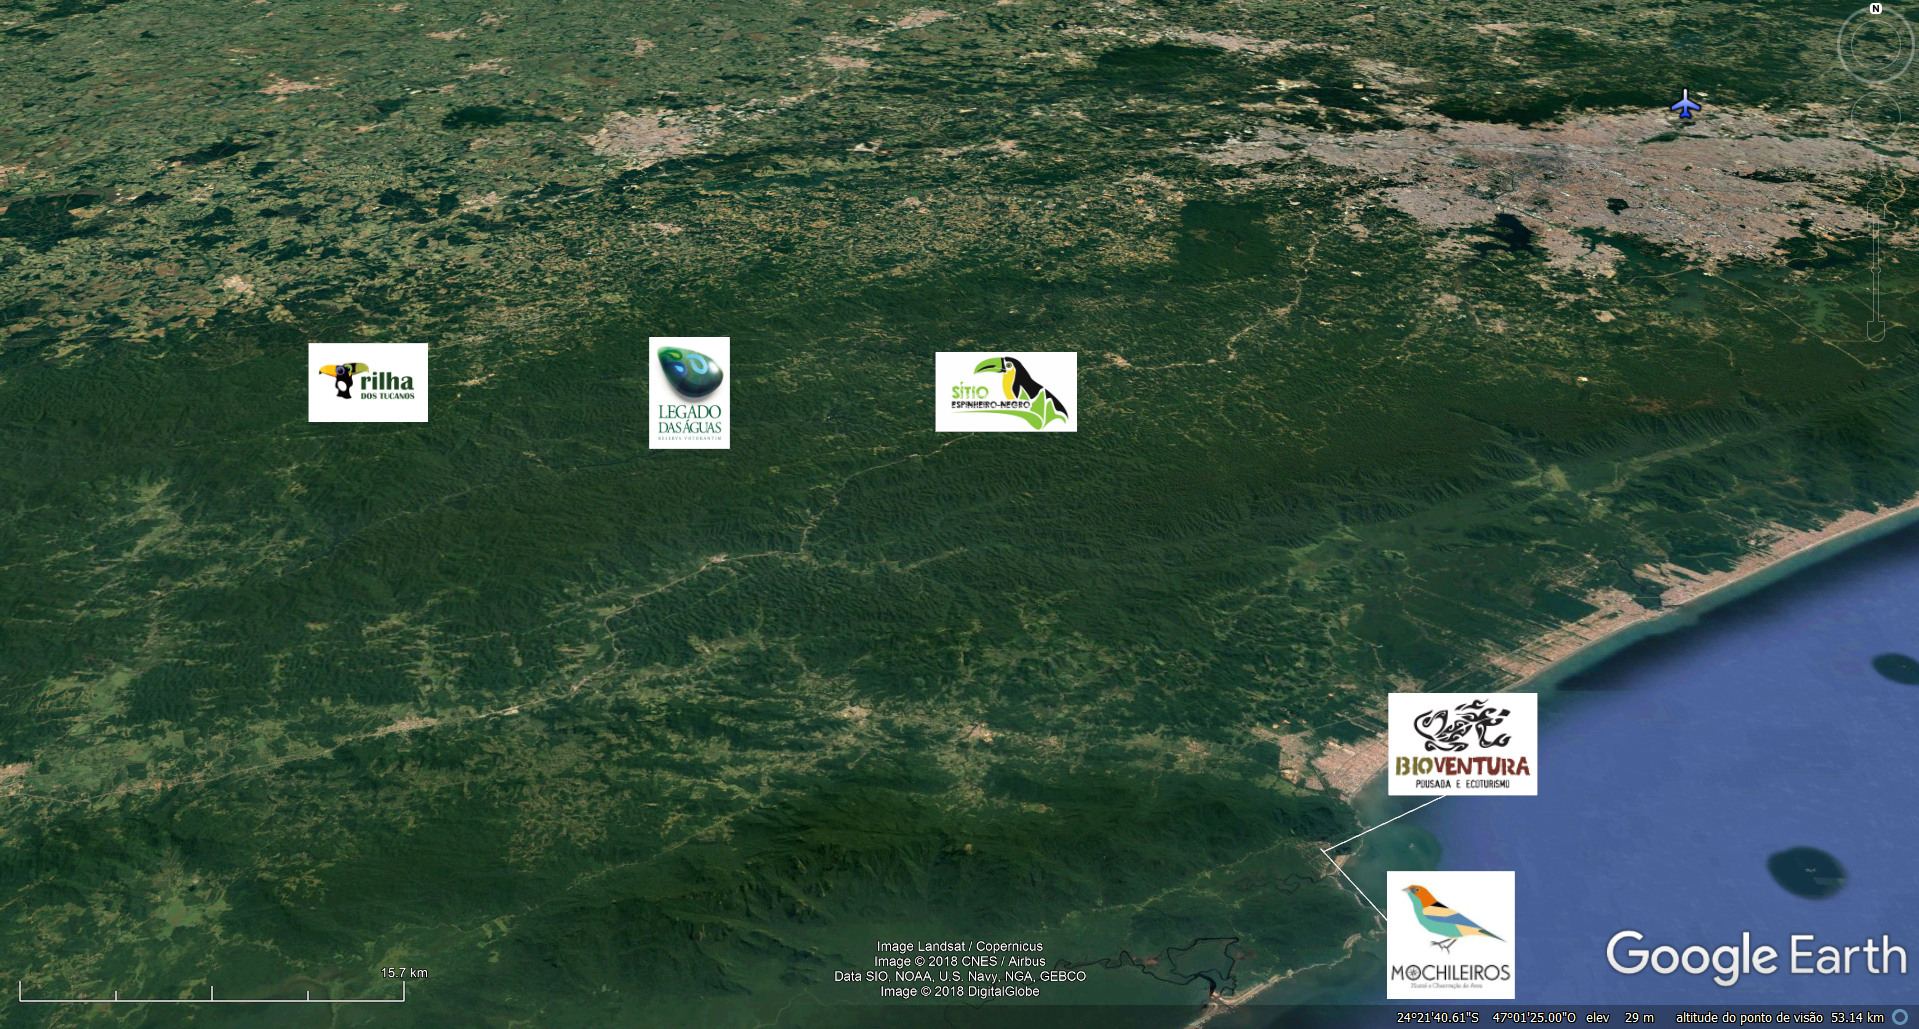 South of Sao Paulo state and lodges for birding